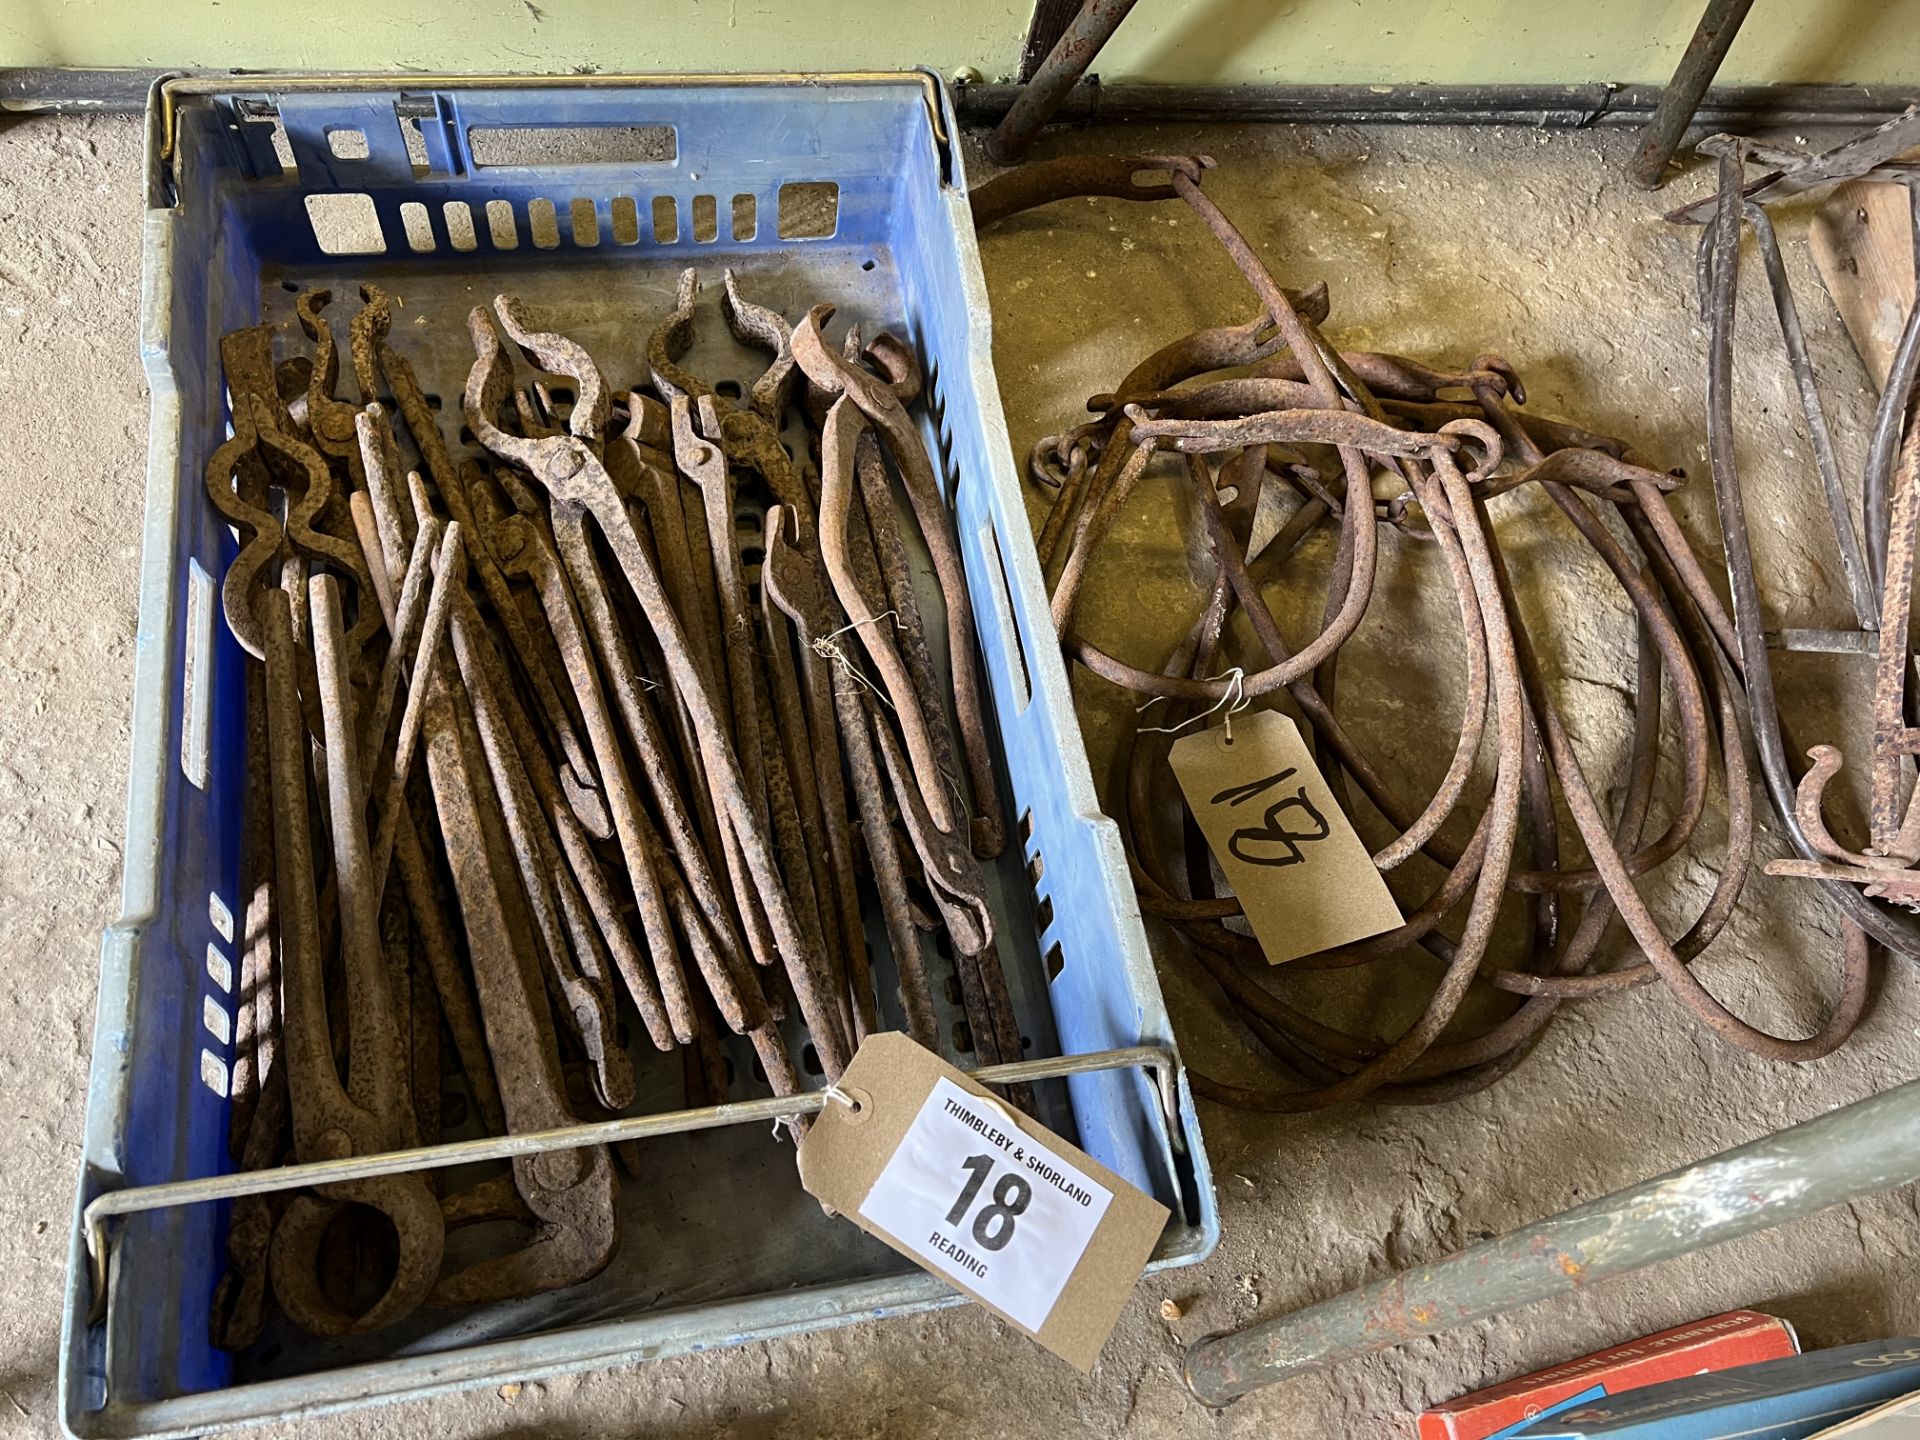 Qty Blacksmiths' tools and other metalwork